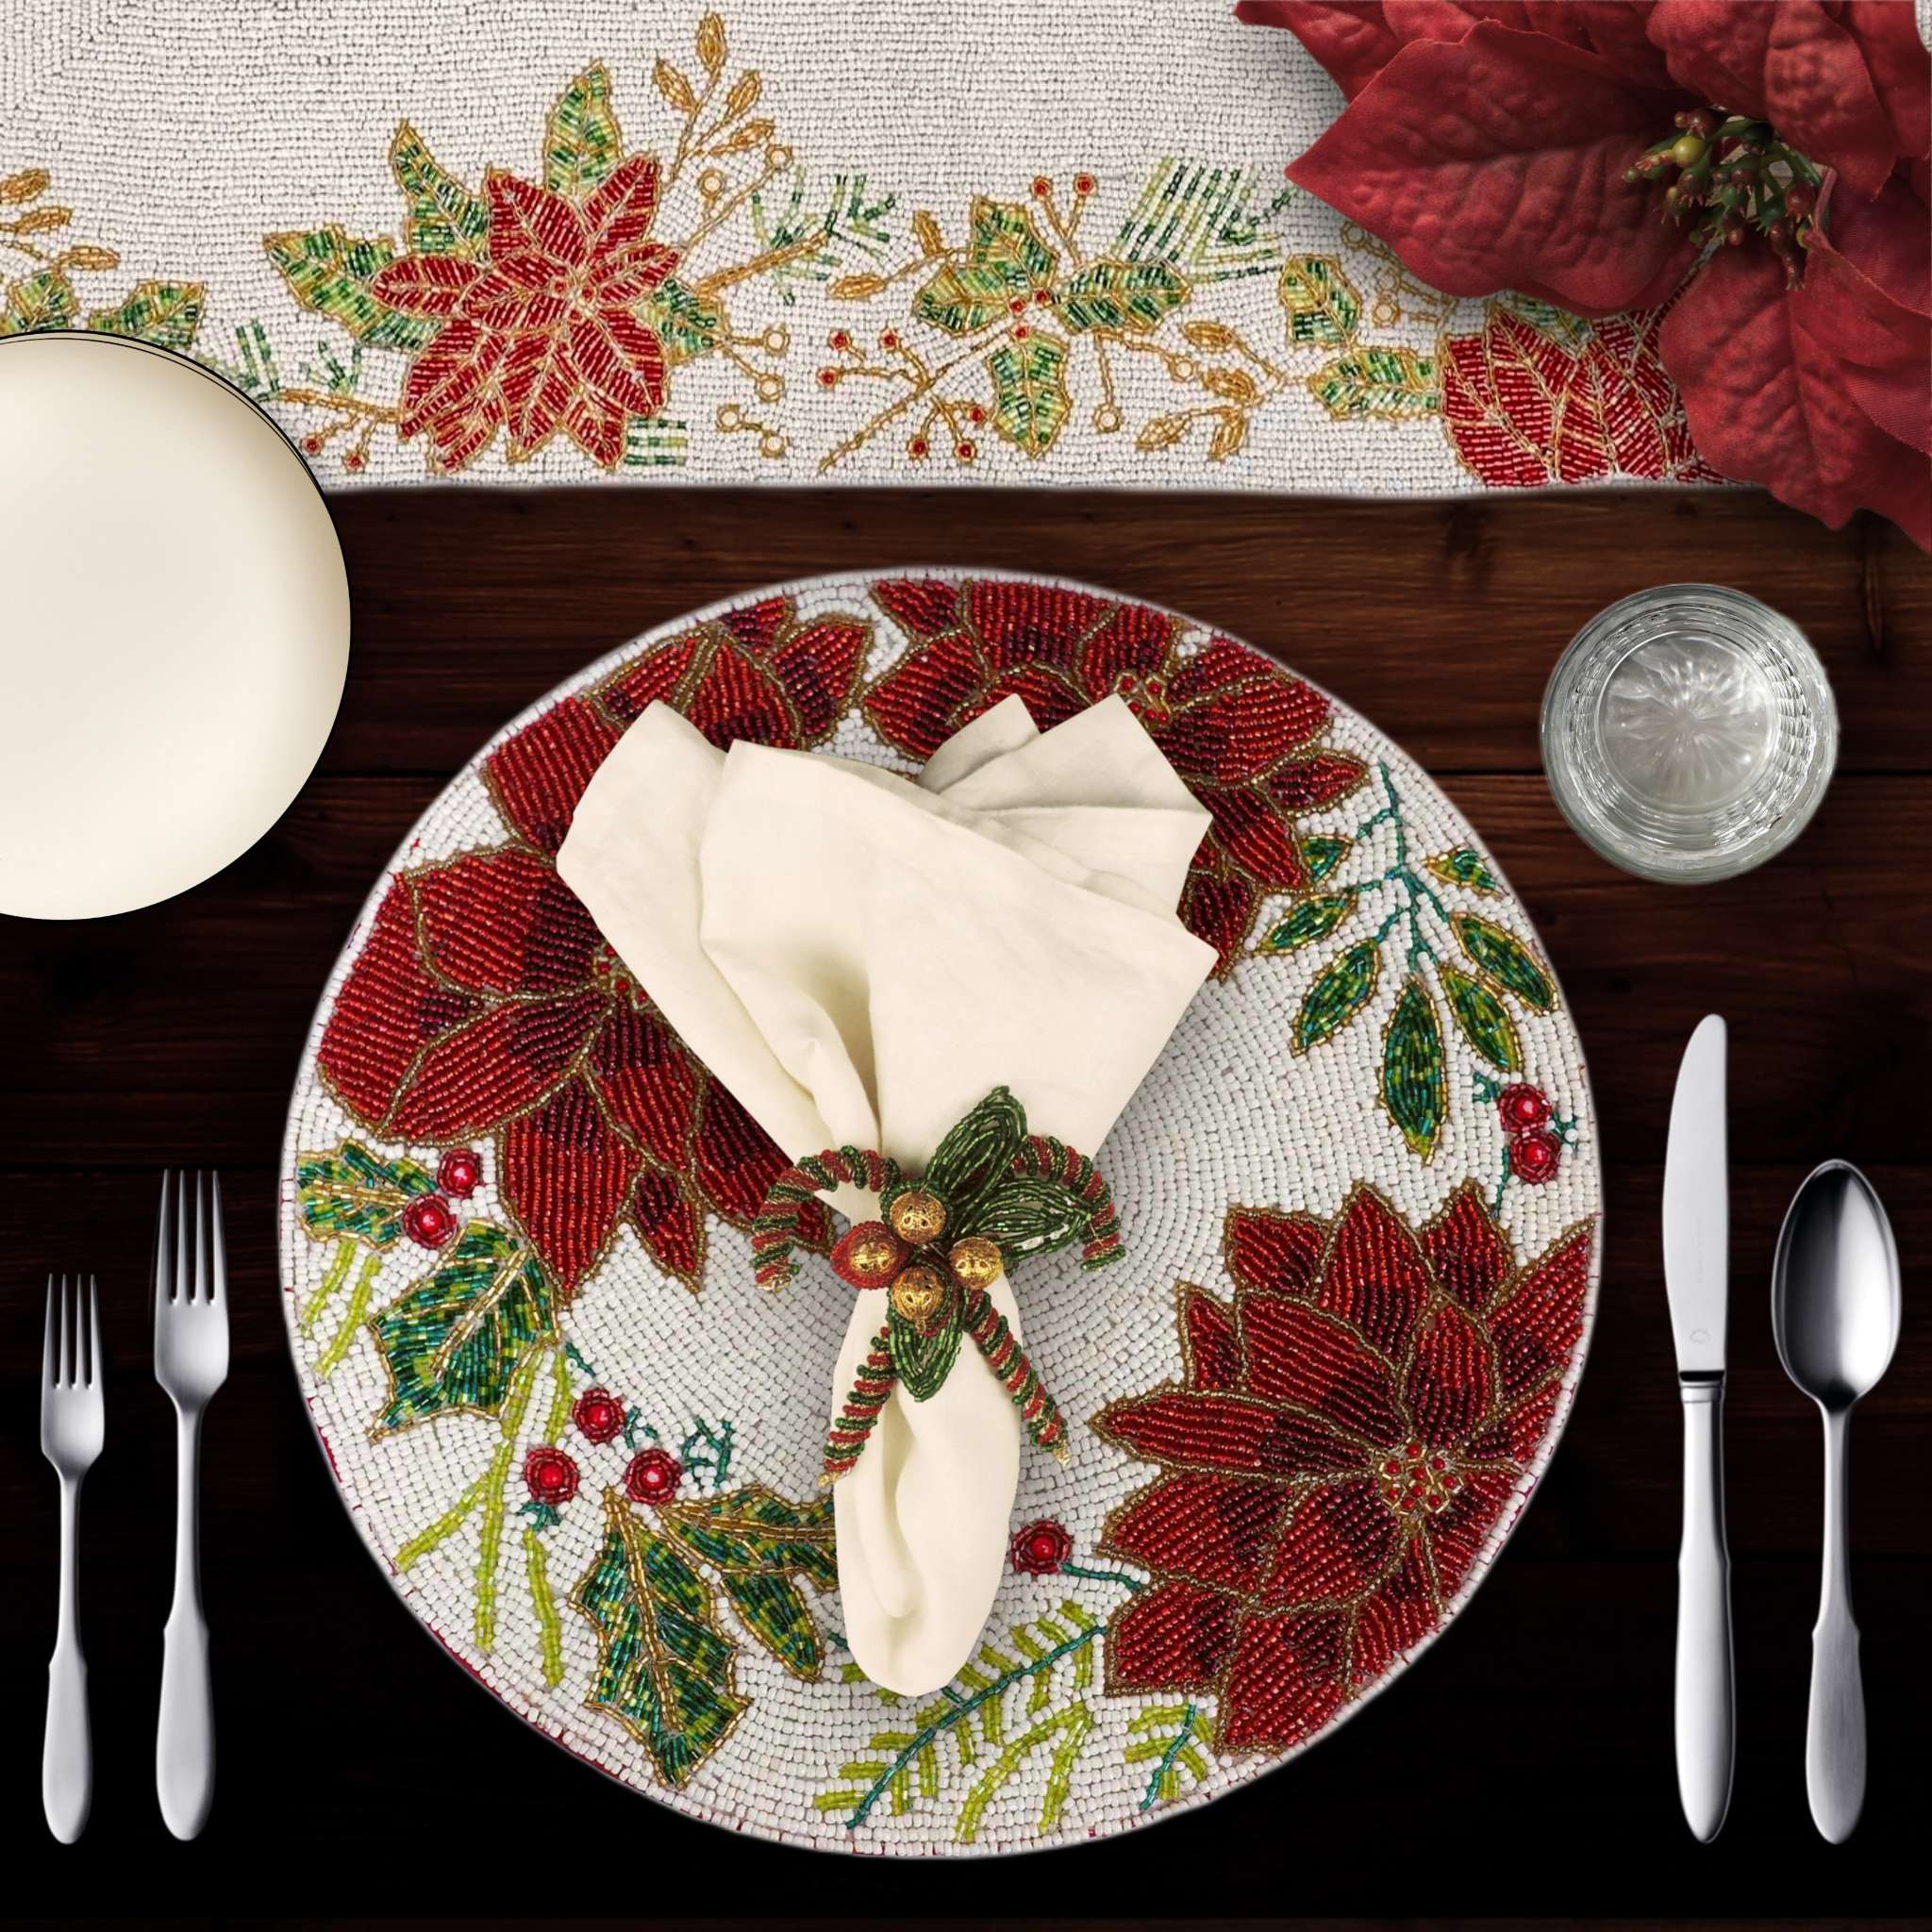 Poinsettia & Holly Bead Table Setting for 4 - Embroidered Holiday Placemats, Napkin Rings & Table Runner in Red & Green